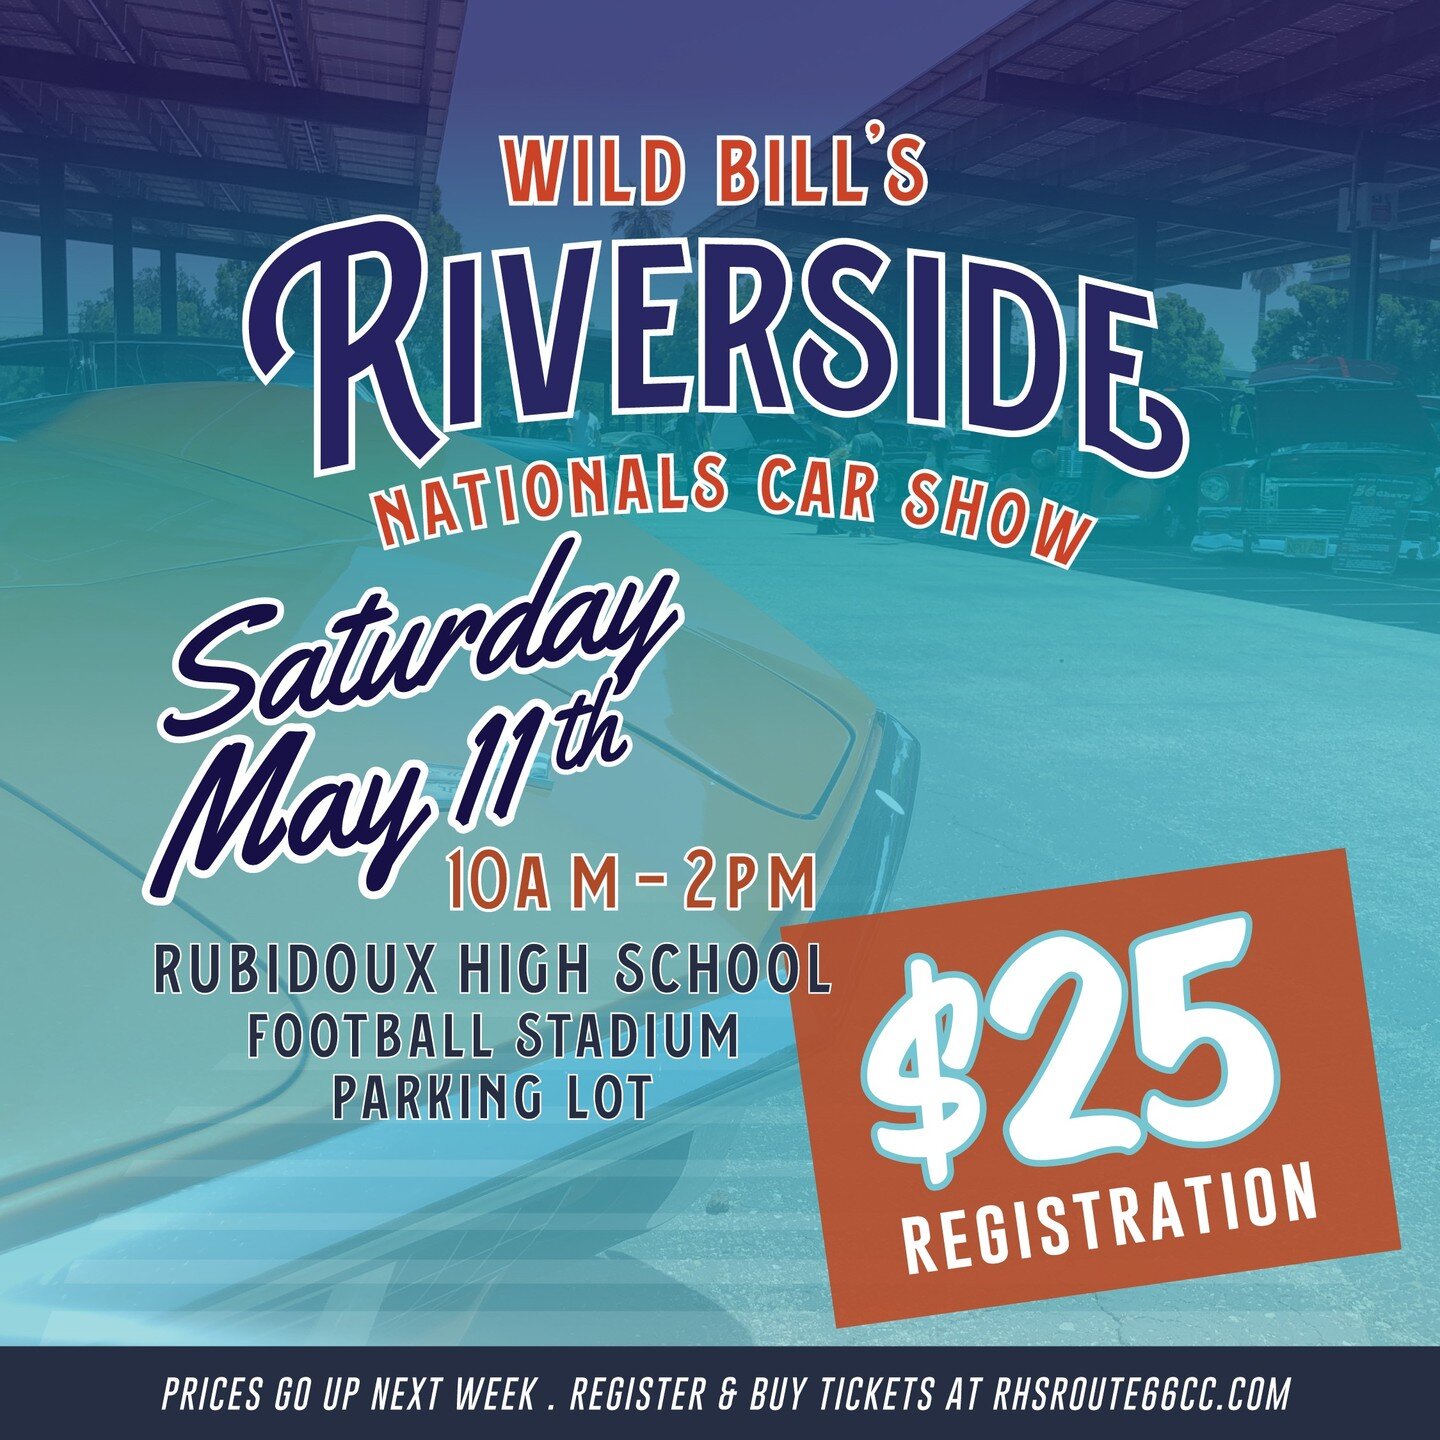 For a limited time online registration is only $25! Support the club and come out to the car show next month.

More info: RHSRoute66CC.com